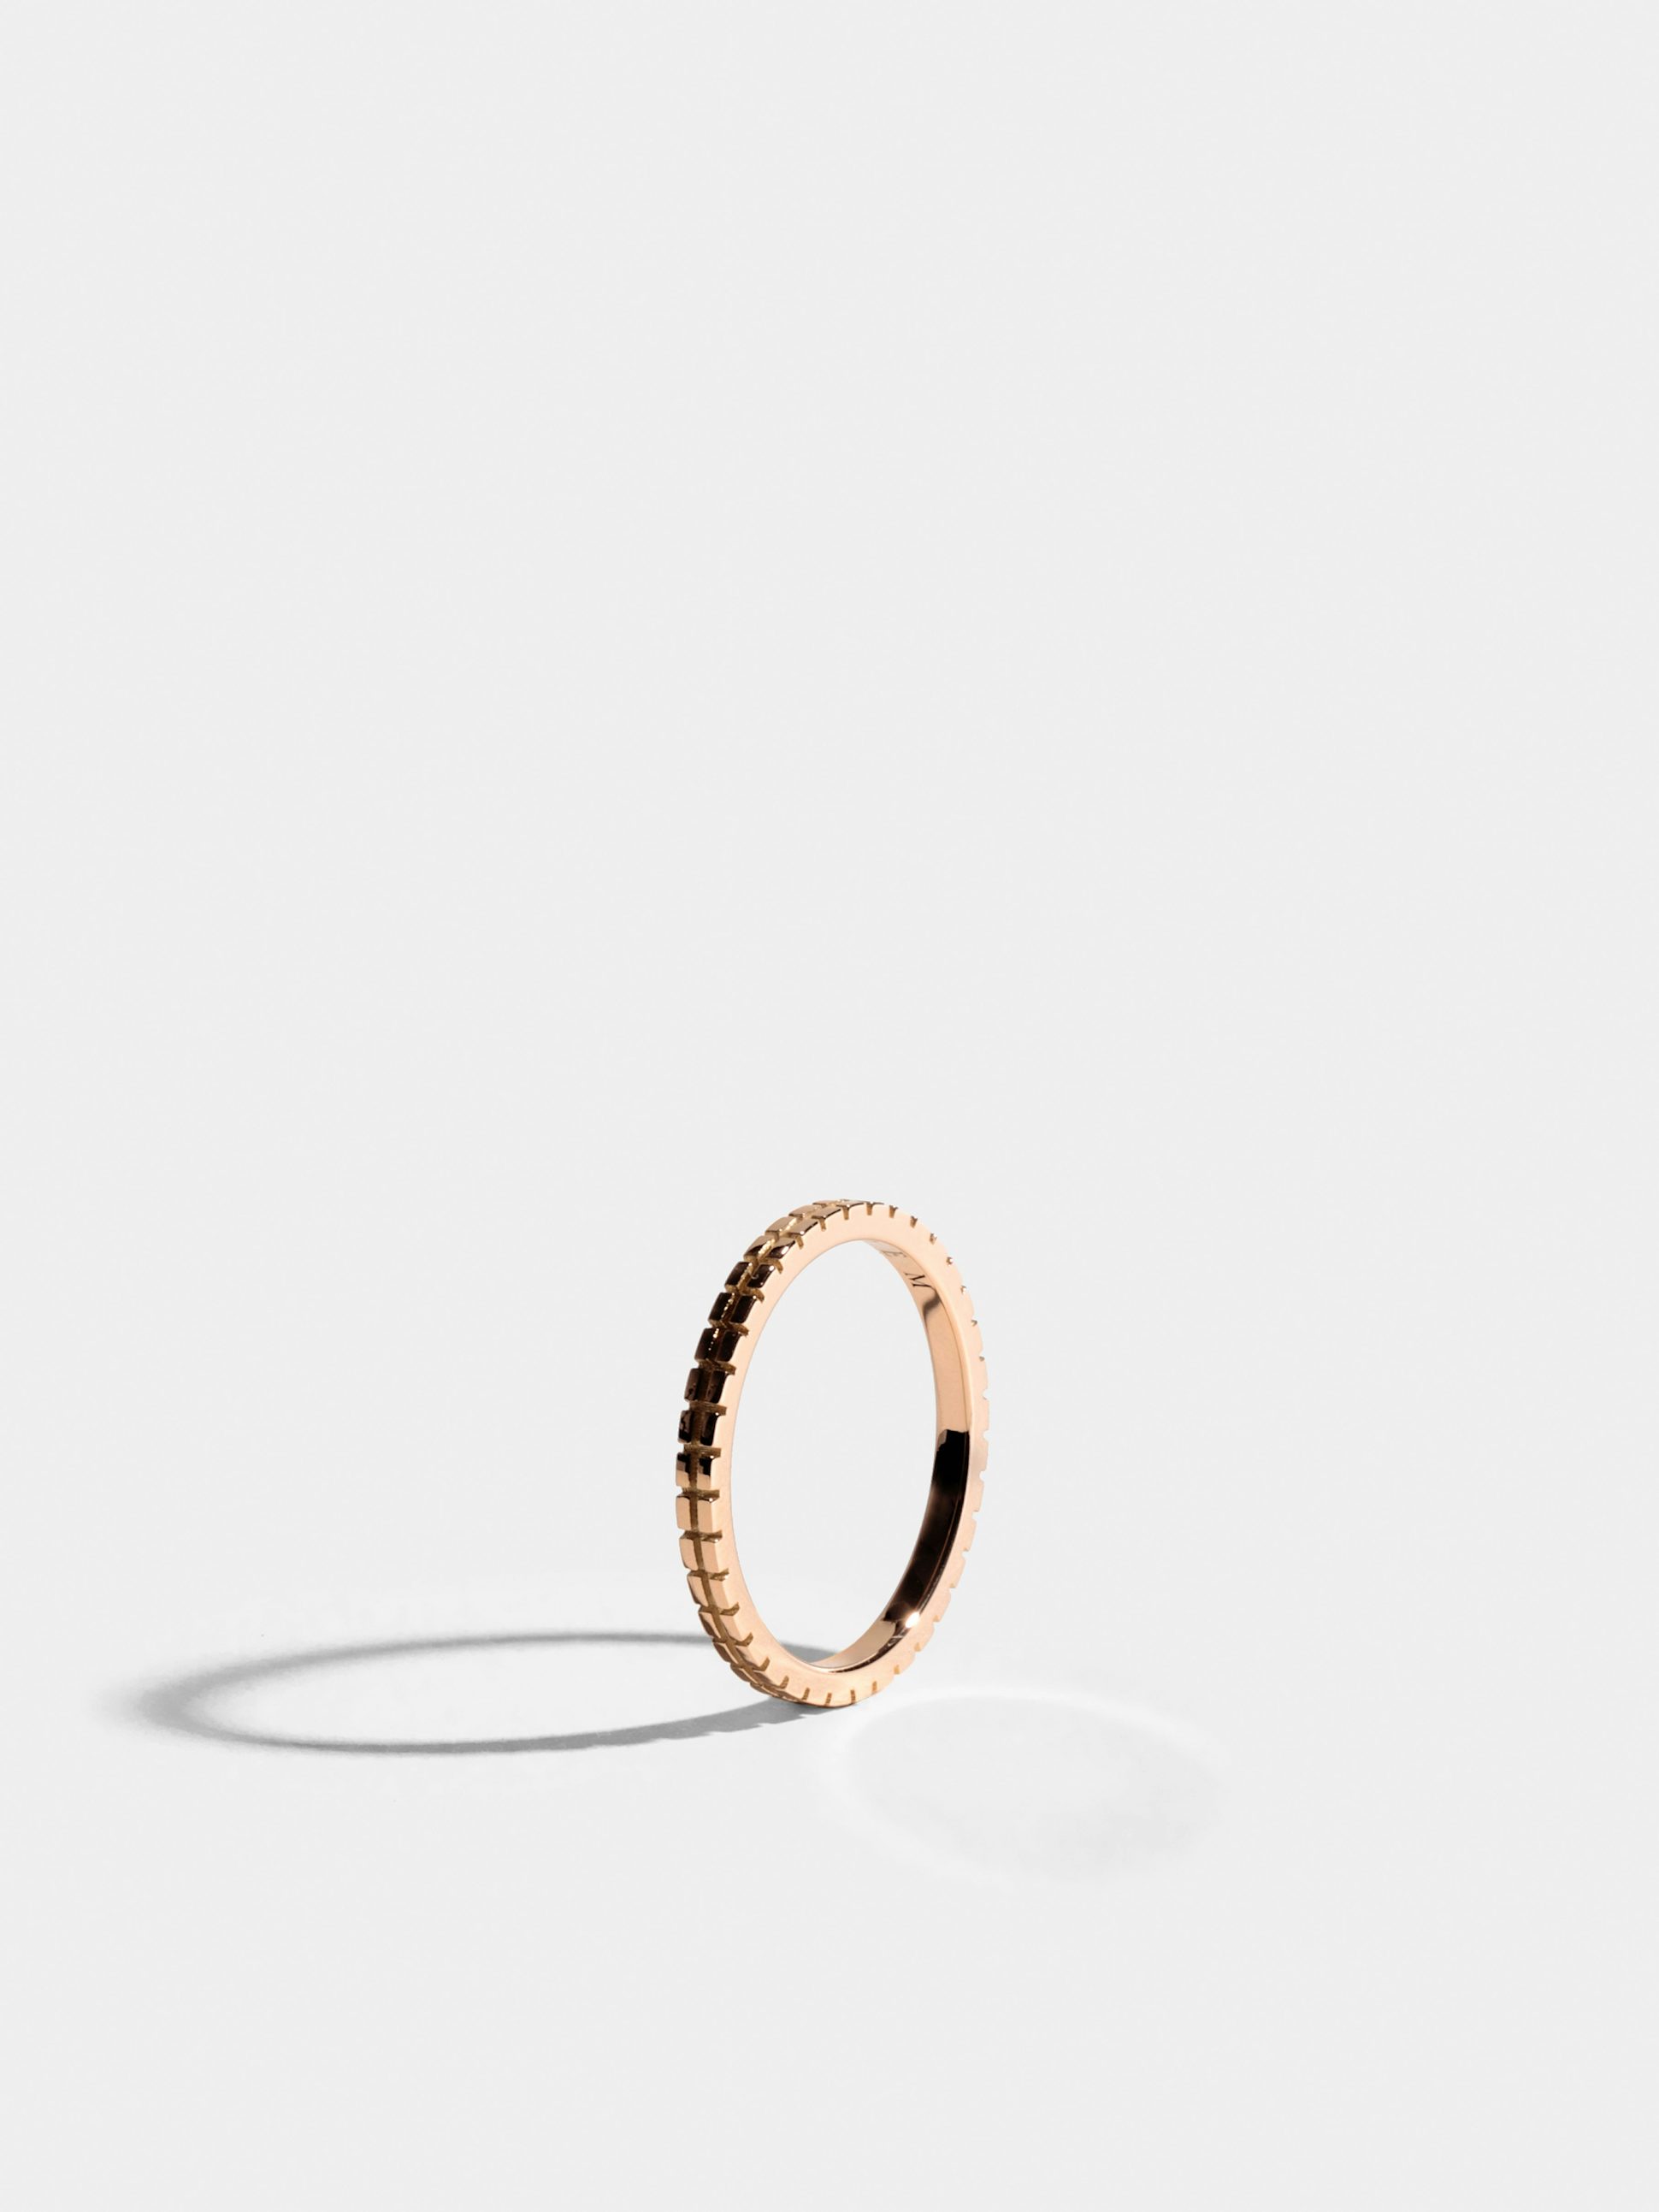 Anagramme "damier" ring in 18k Fairmined ethical pink gold